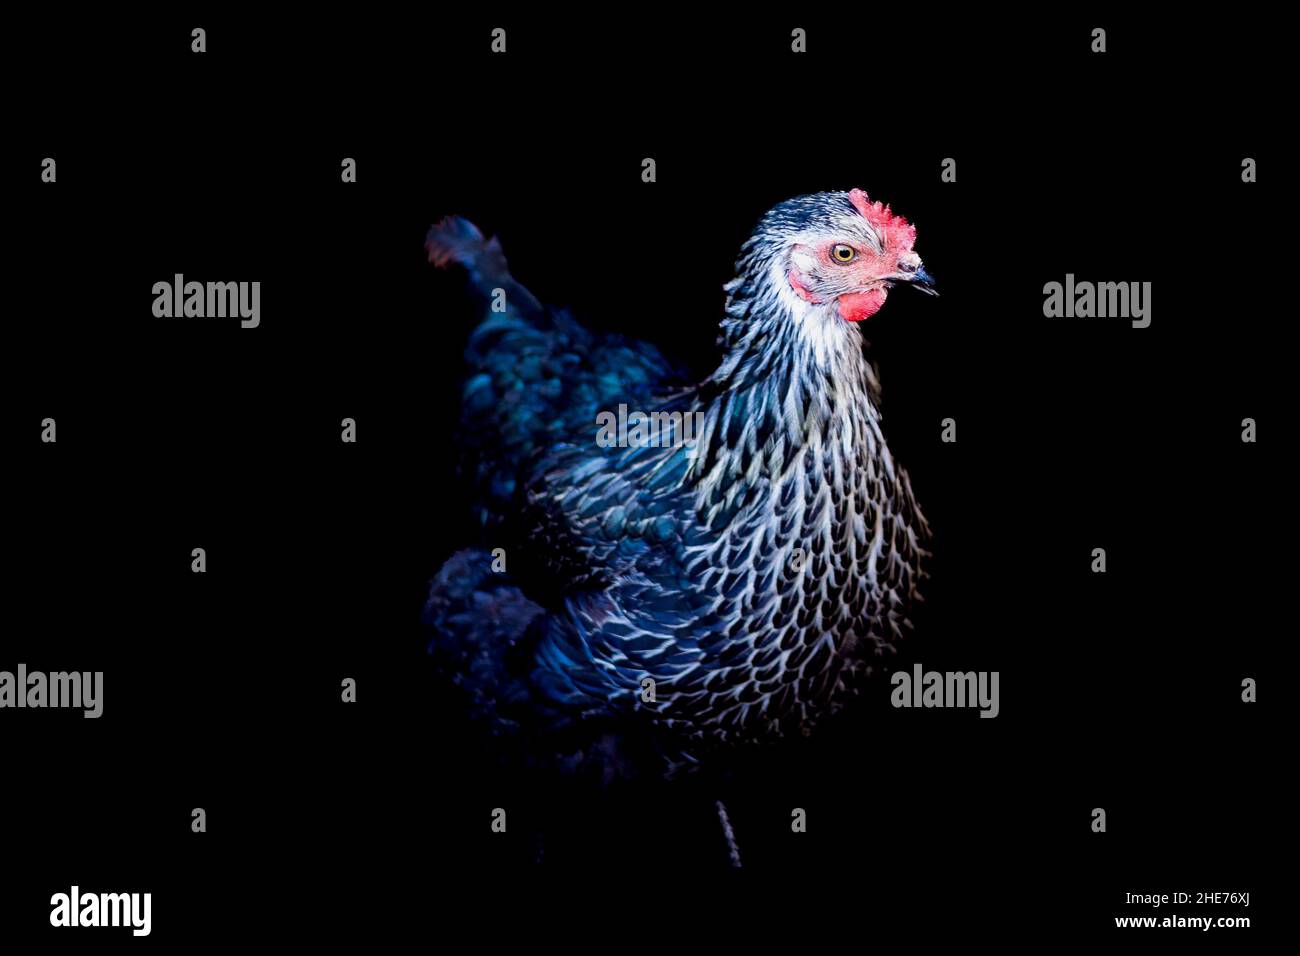 Backyard Chickens in profile with black background Stock Photo